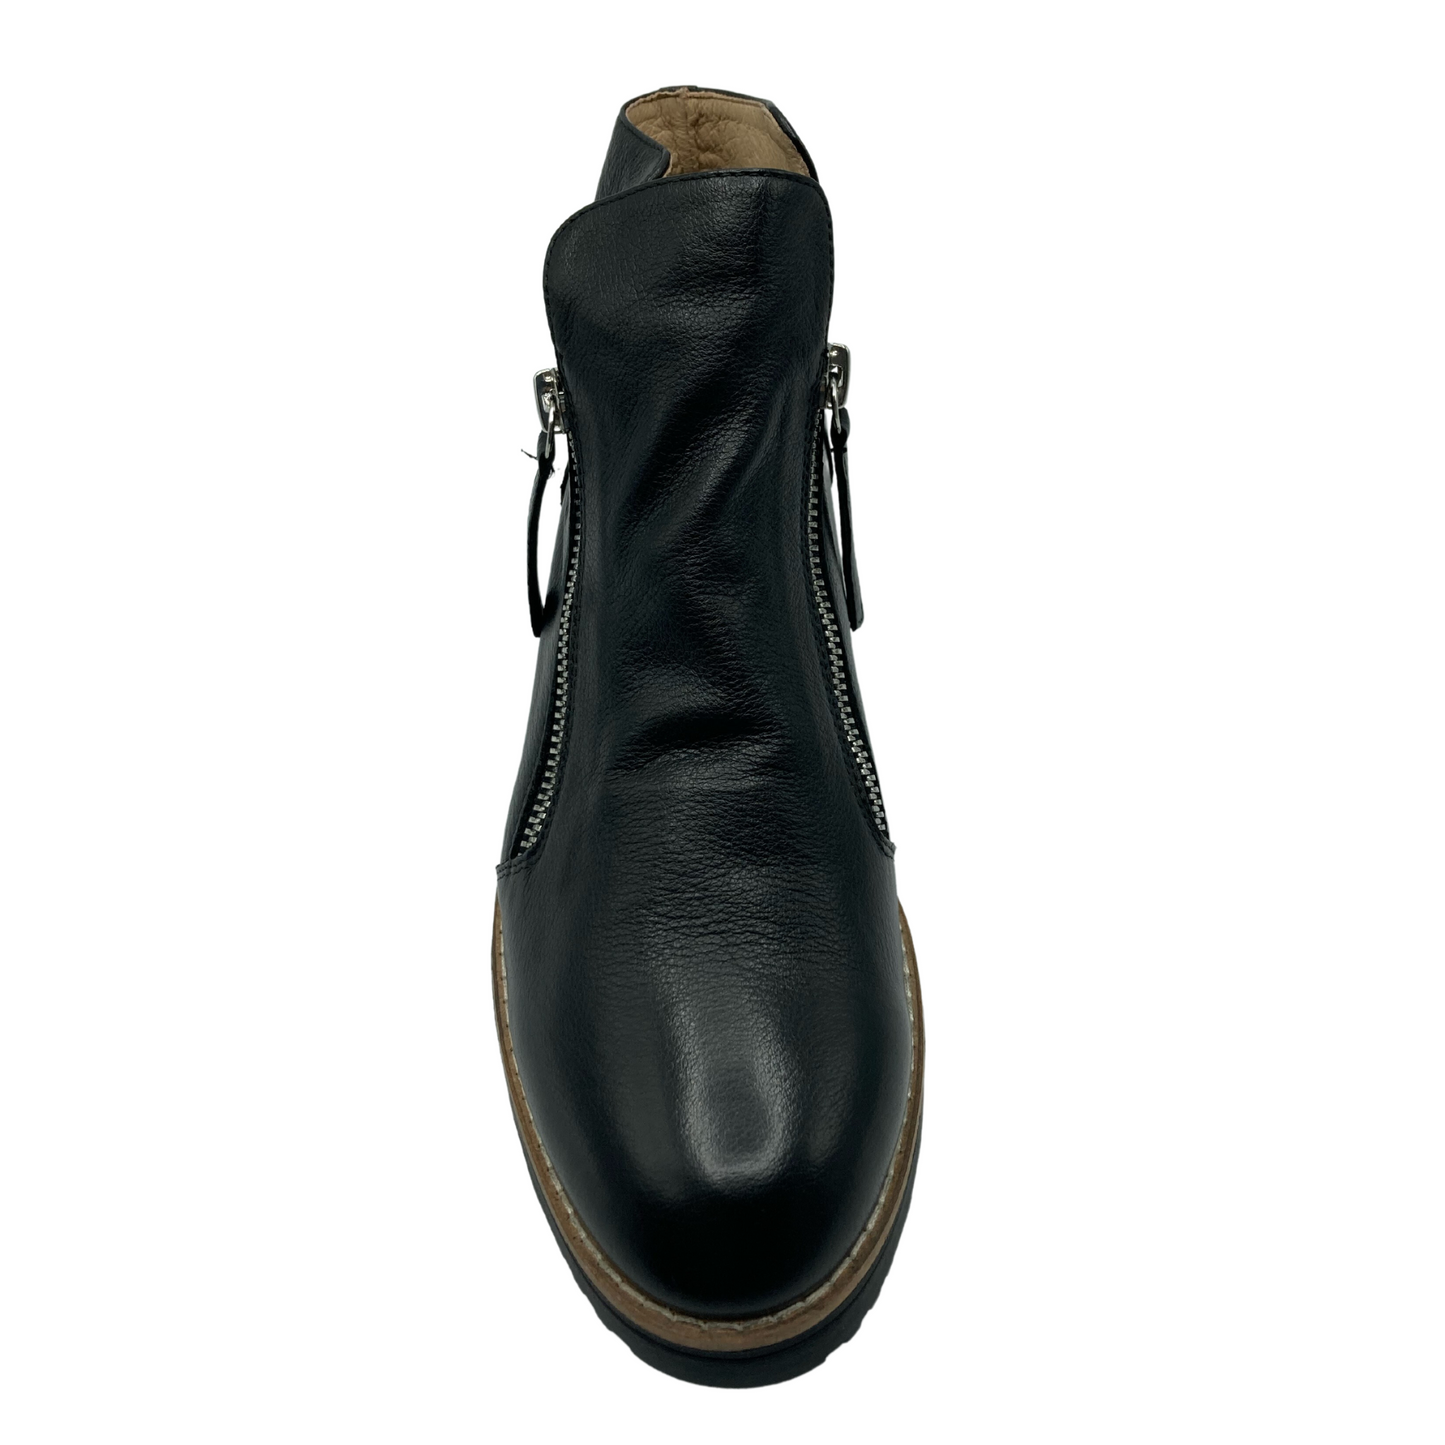 Top view of black leather boot with rounded toe and a zipper on either side of the ankle